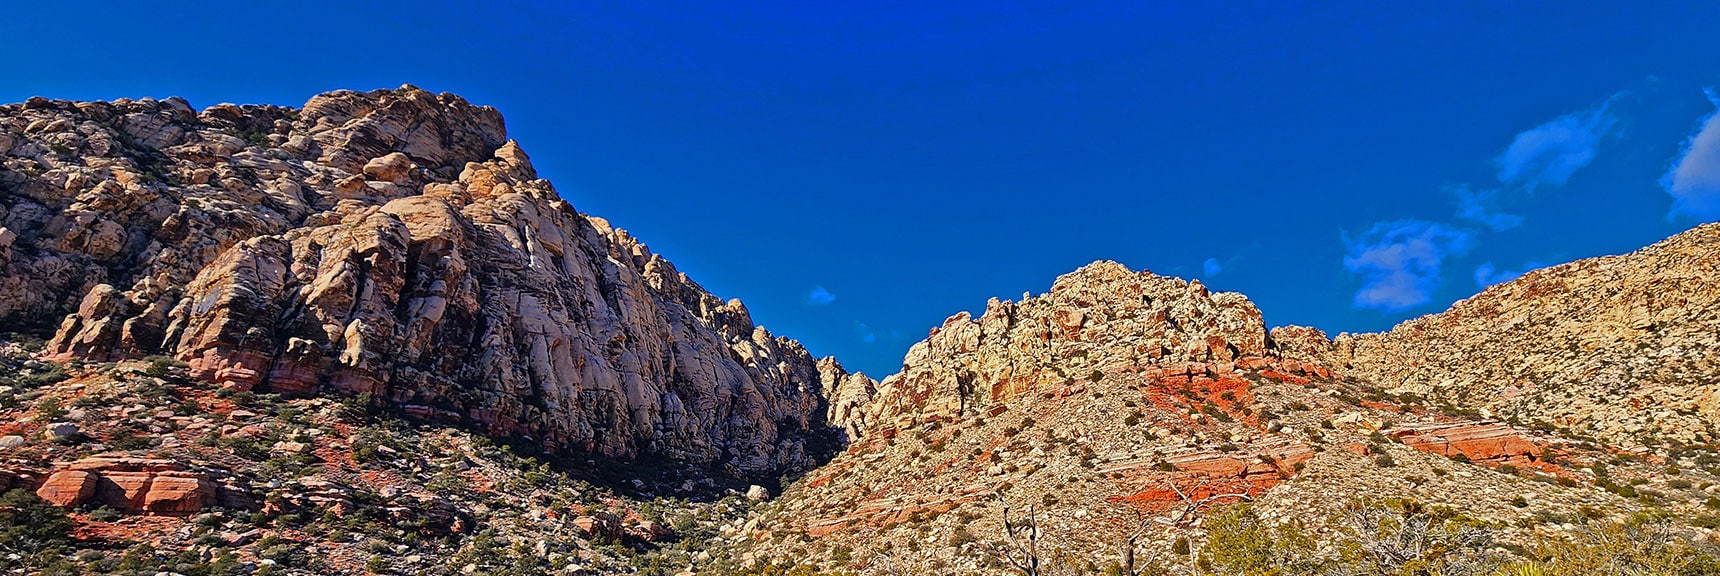 Potential Canyon Ascent Route on Southwest Side of White Rock Mountain. | White Rock Mountain Loop Trail | Red Rock Canyon, Nevada